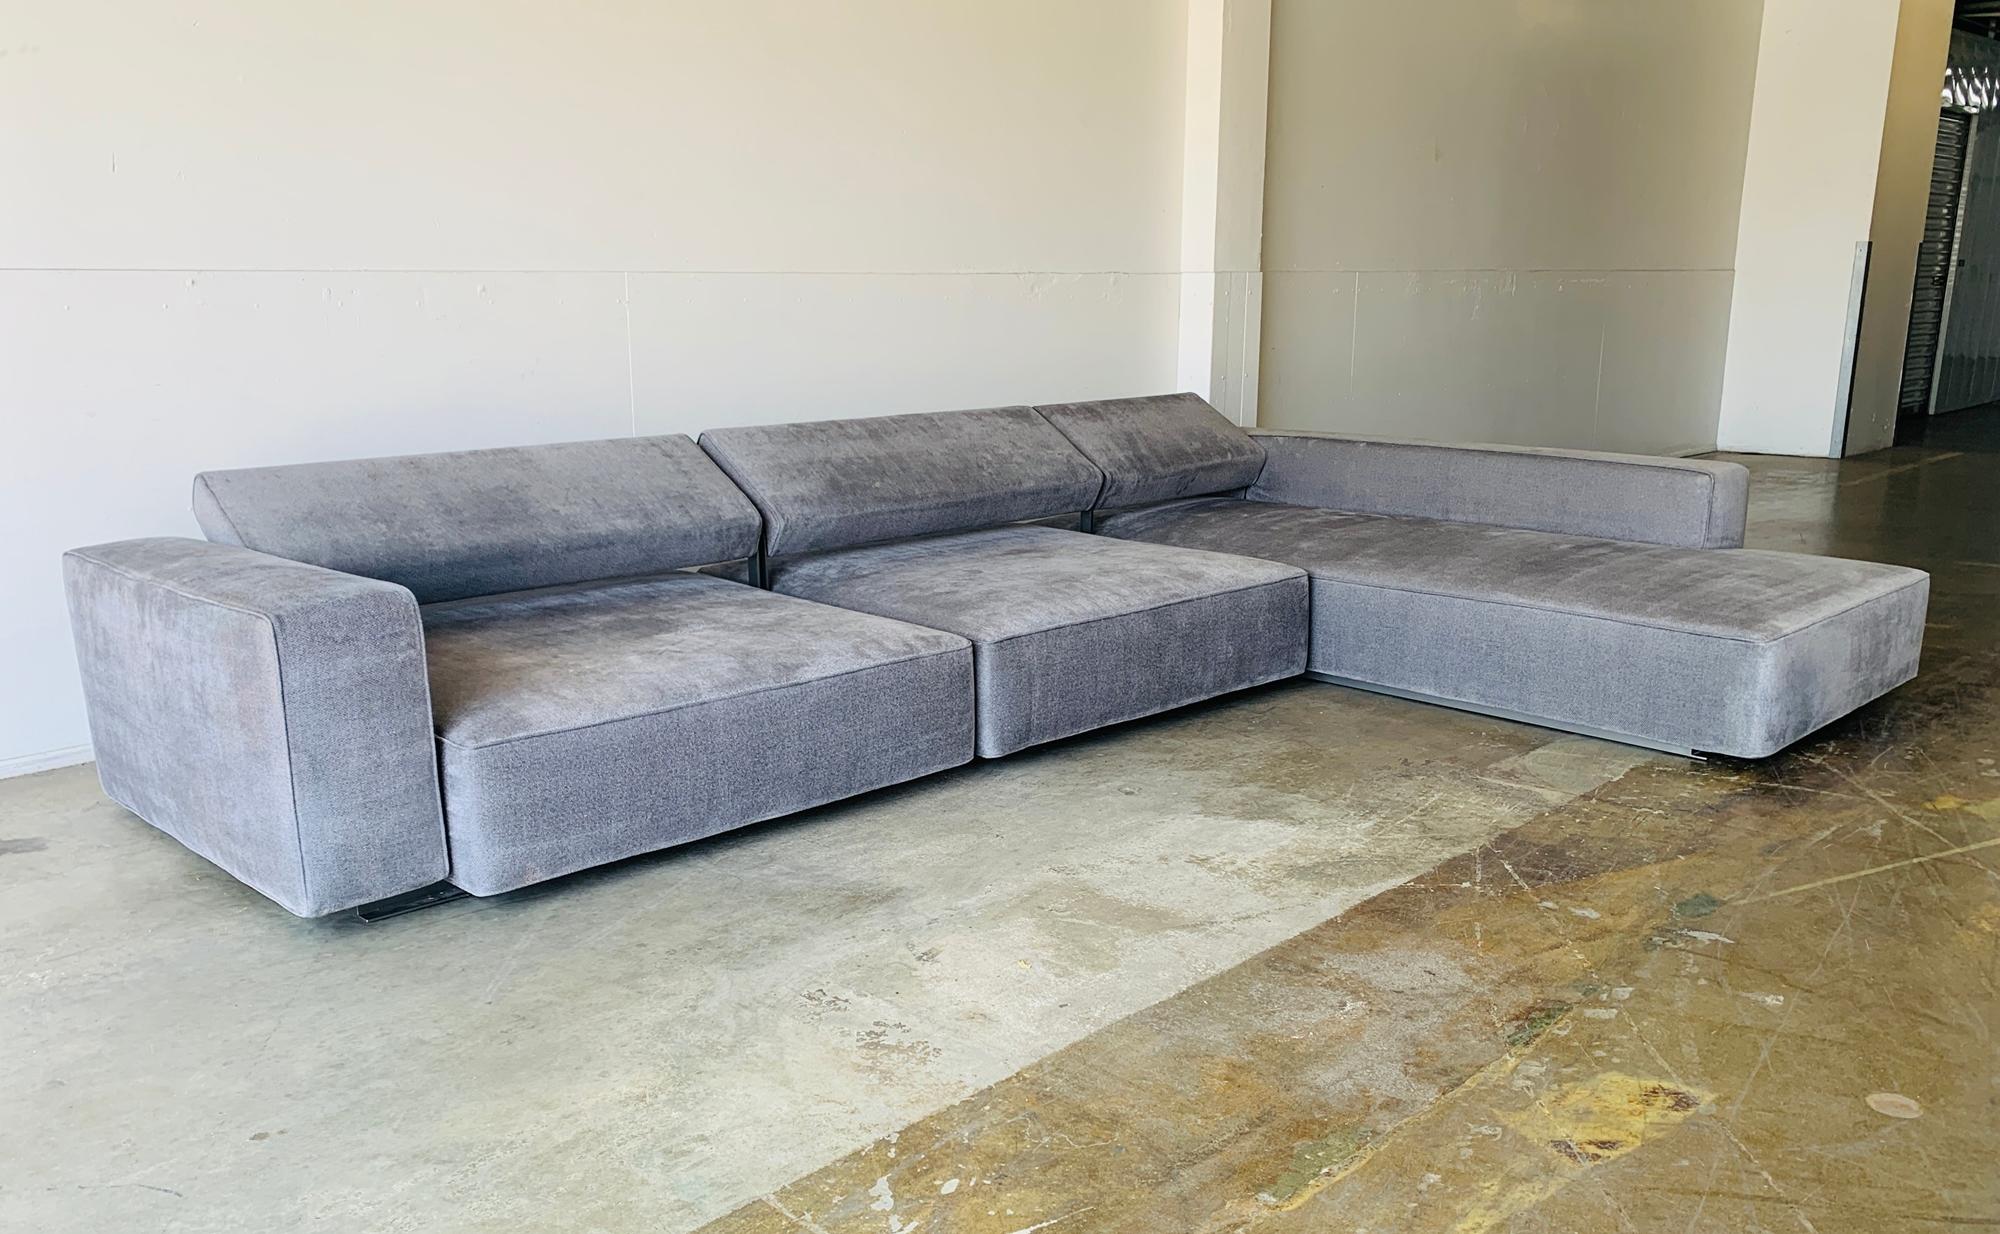 The Andy sofa was Paolo Piva's last design. This landscape sofa with adjustable seat depth and chaise longue is generously proportioned. The back can change its inclination from a horizontal and more modern position to a vertical one for more